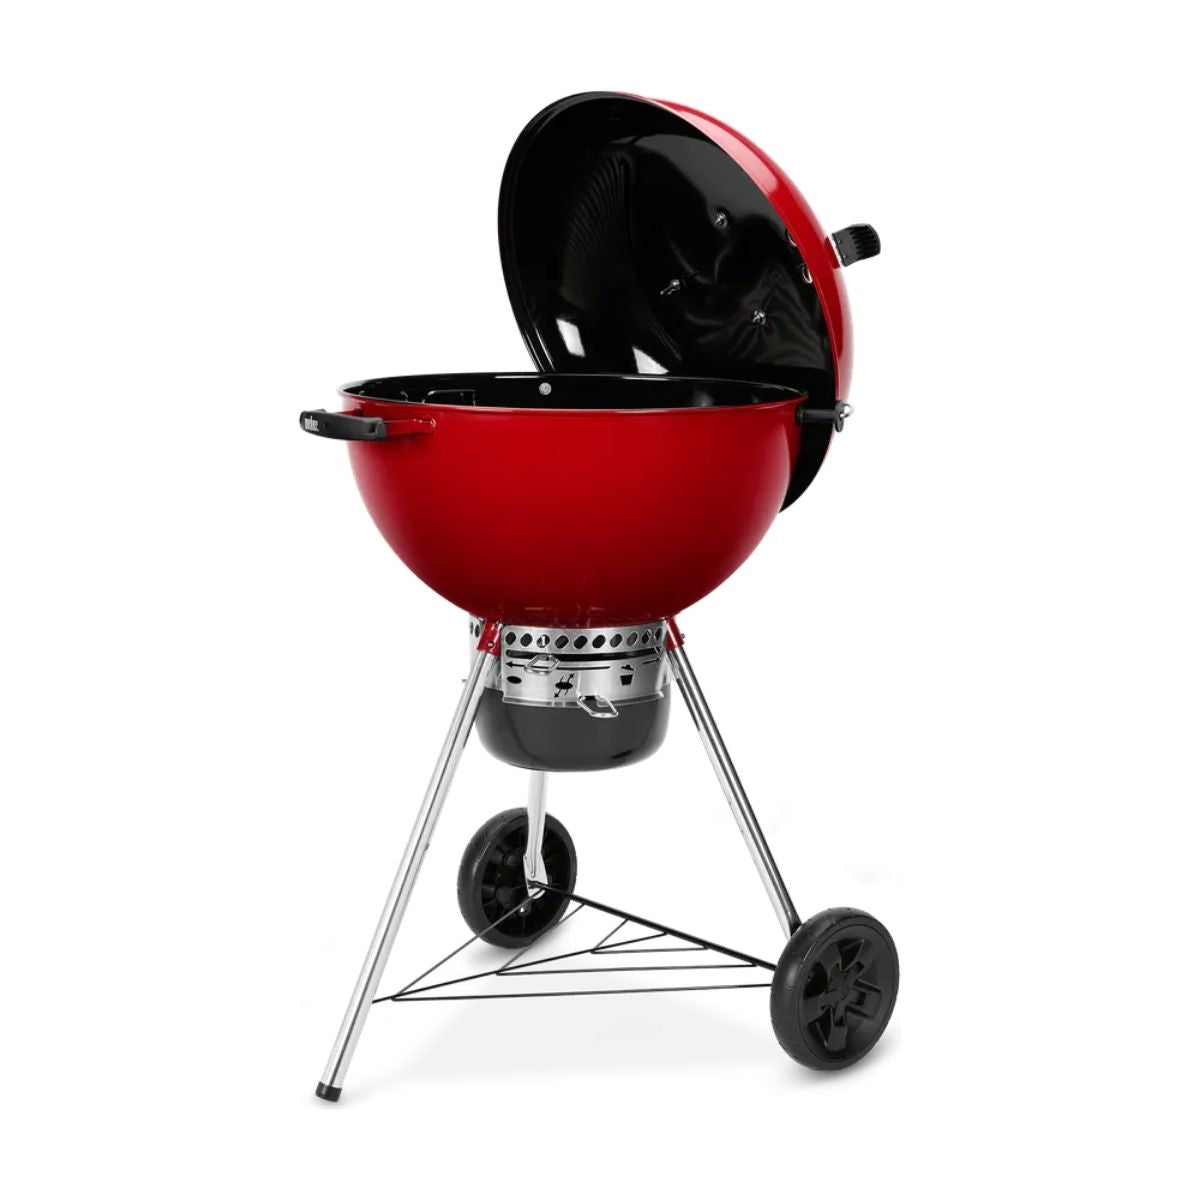 Weber Original Kettle Premium Limited Edition Charcoal Grill 57cm (Red)